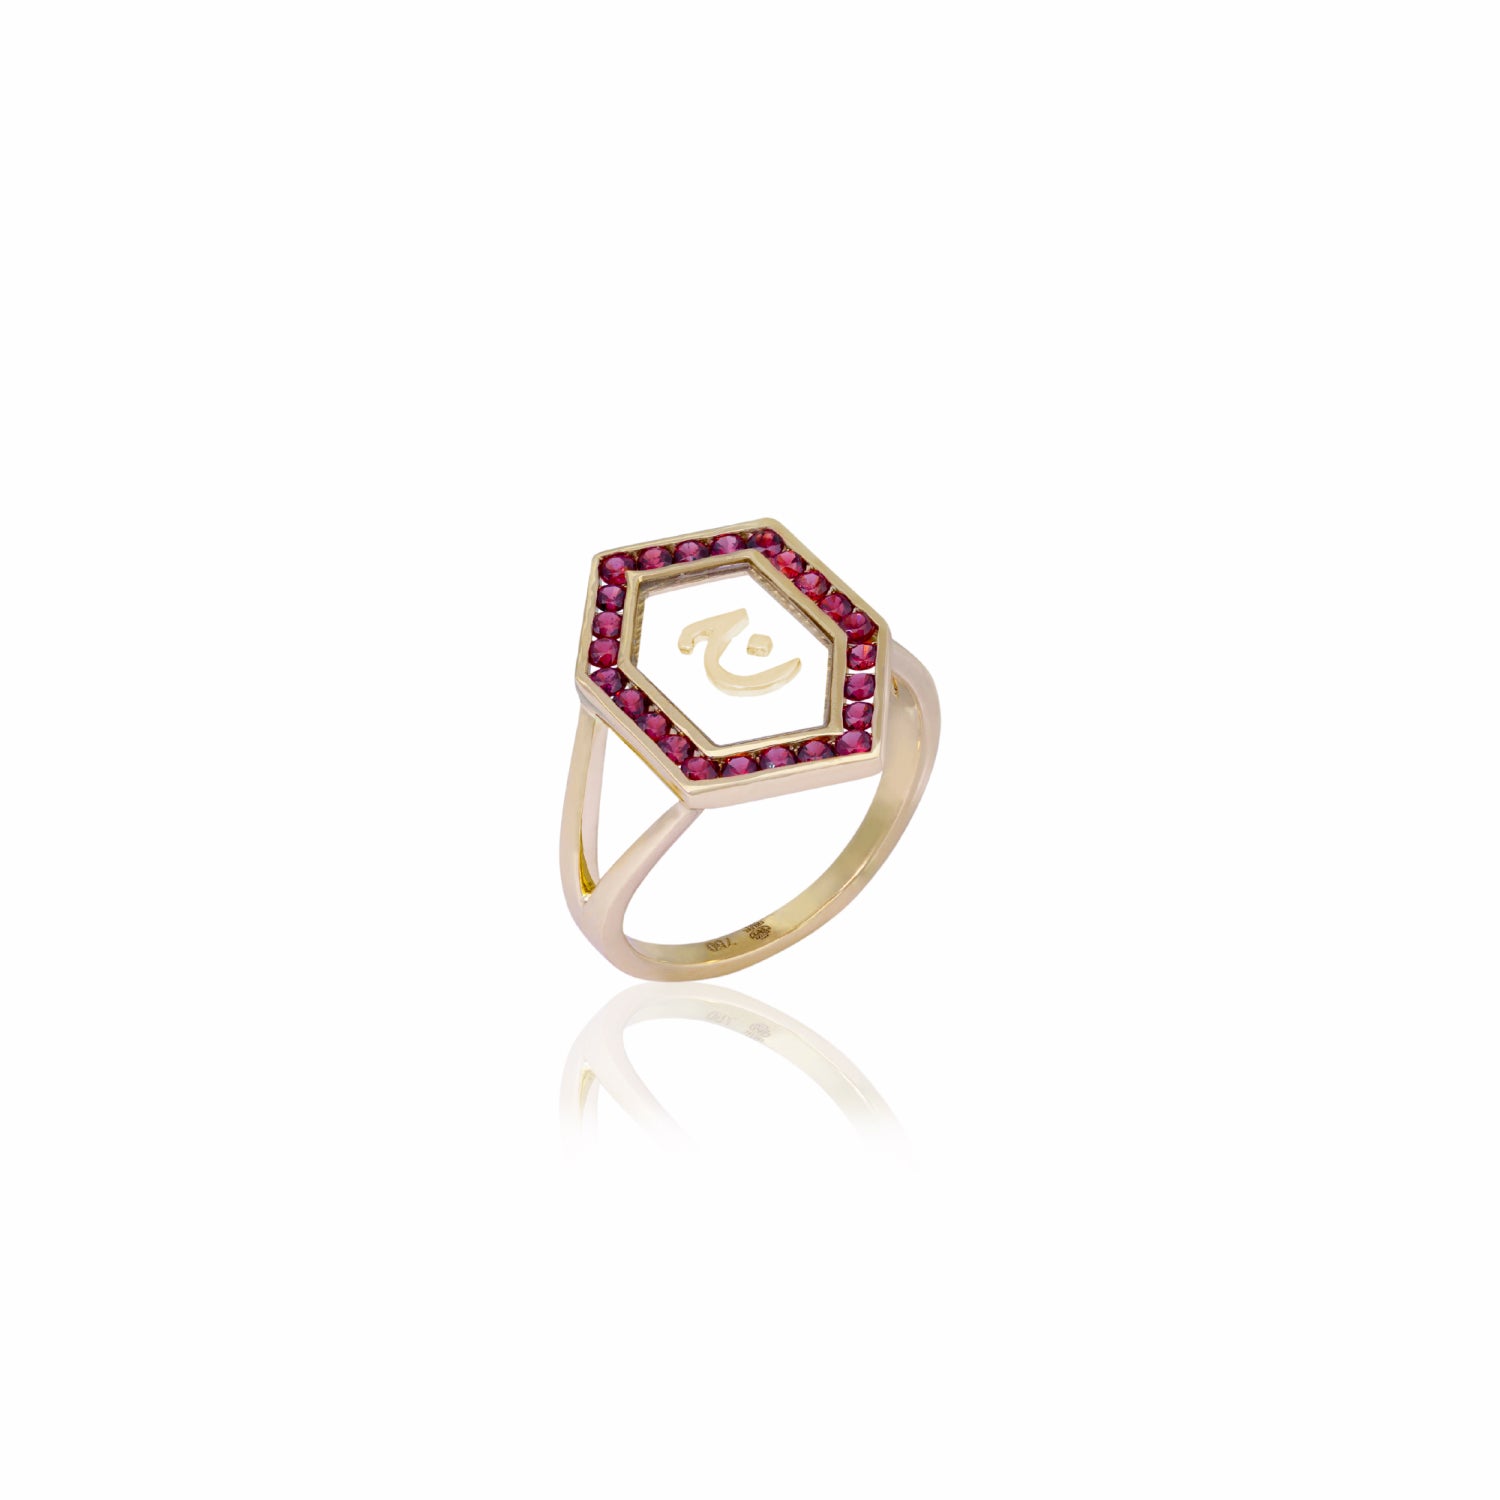 Qamoos 1.0 Letter ج Ruby Ring in Yellow Gold